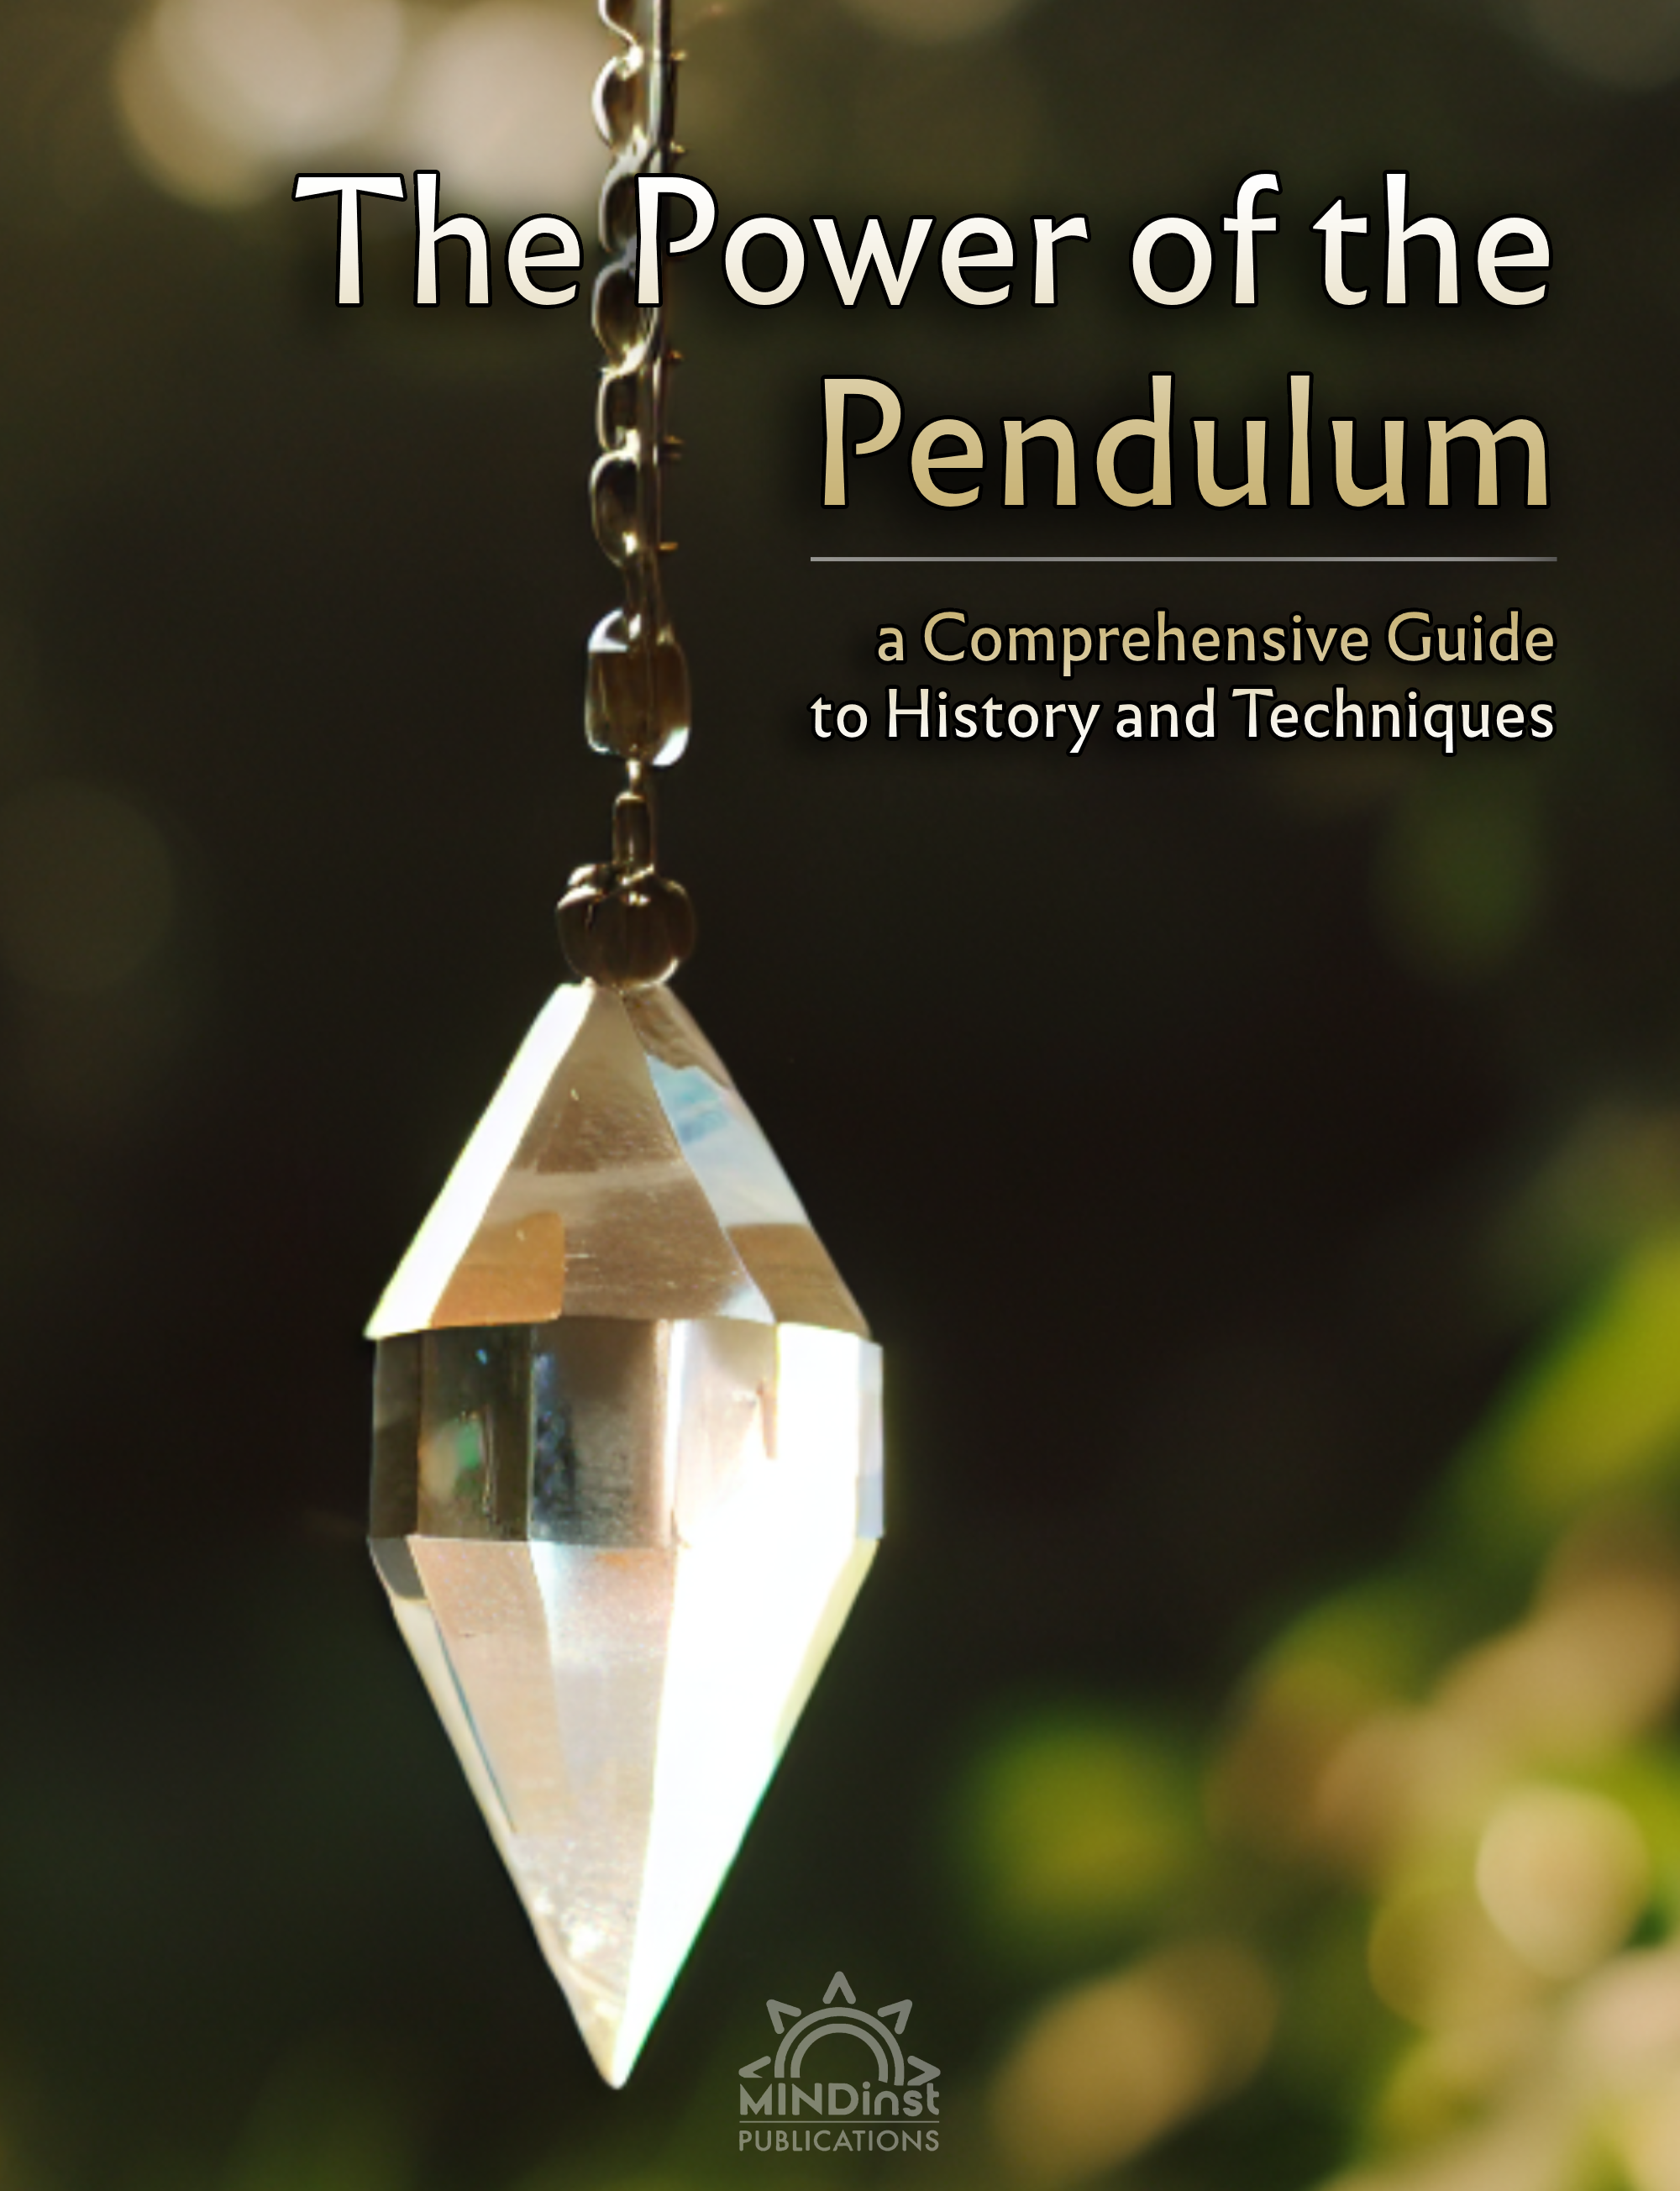 The Power of the Pendulum: a Comprehensive Guide to History and Techniques